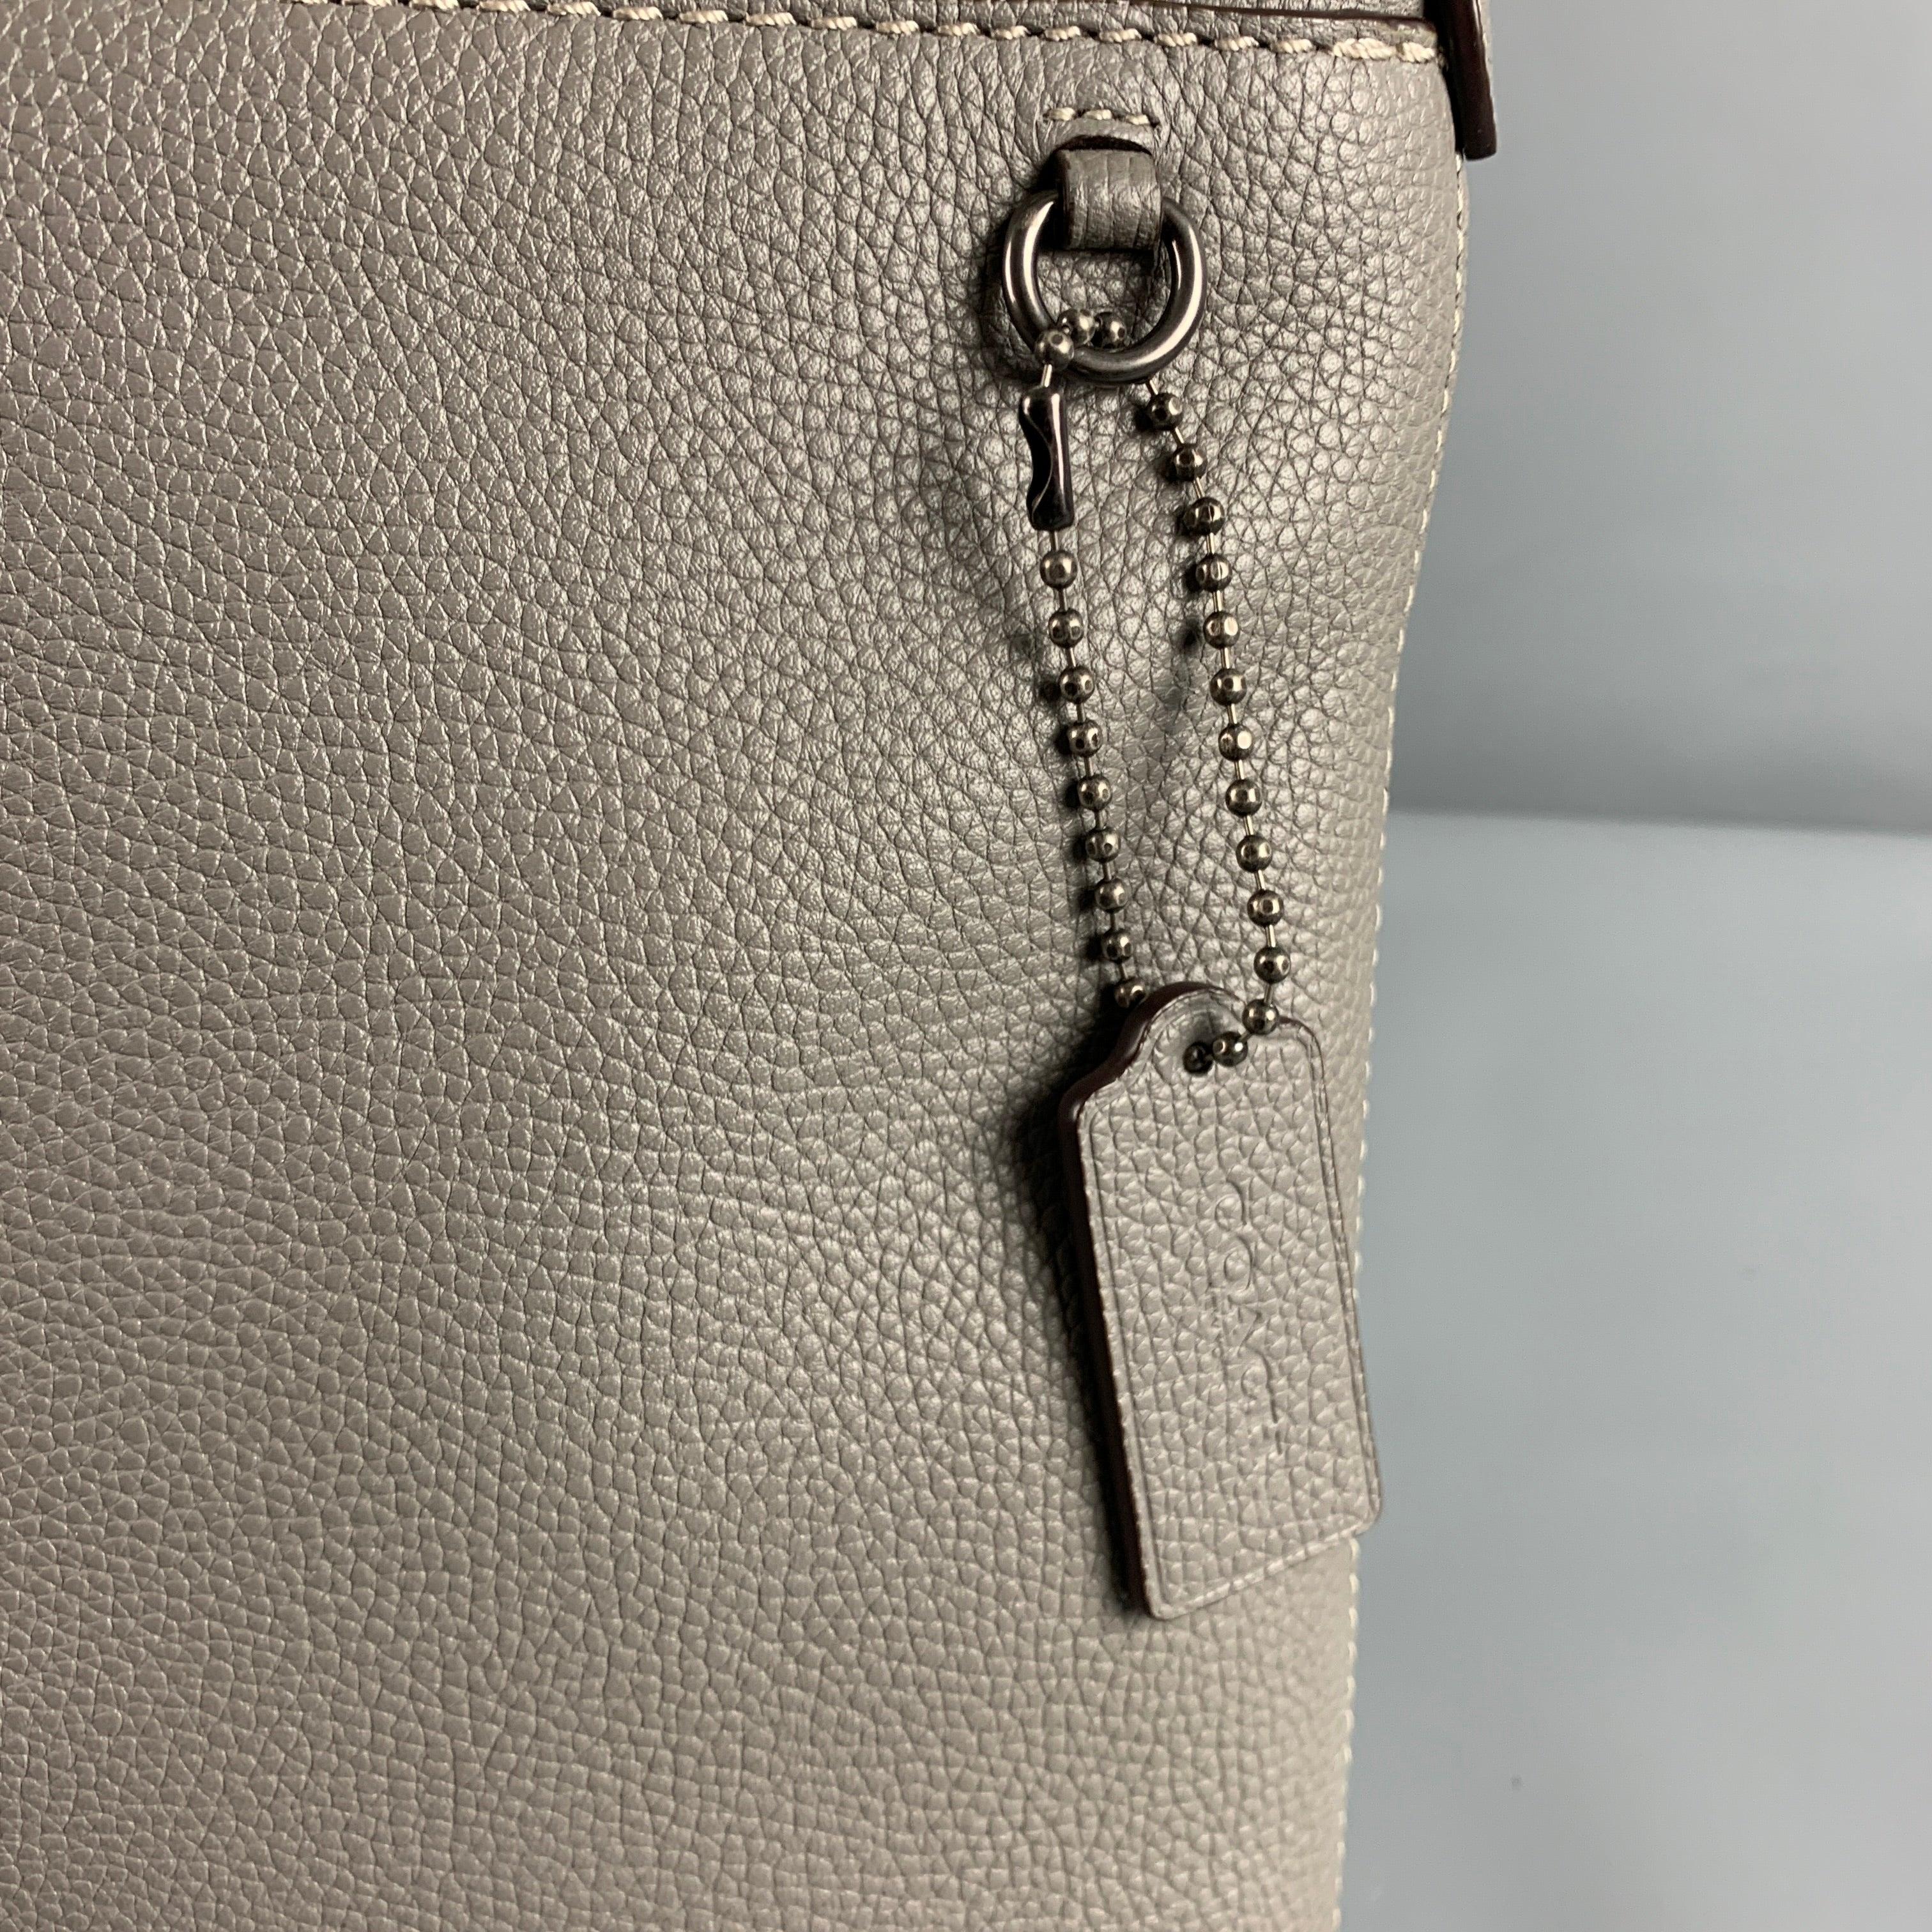 COACH handbag
in a grey leather featuring a pebble grain texture, contrasting black adjustable strap, gunmetal tone hardware, and zip closure.Very Good Pre-Owned Condition. Minor mark on front and strap. 

Measurements: 
  Length: 10 inches Width: 1